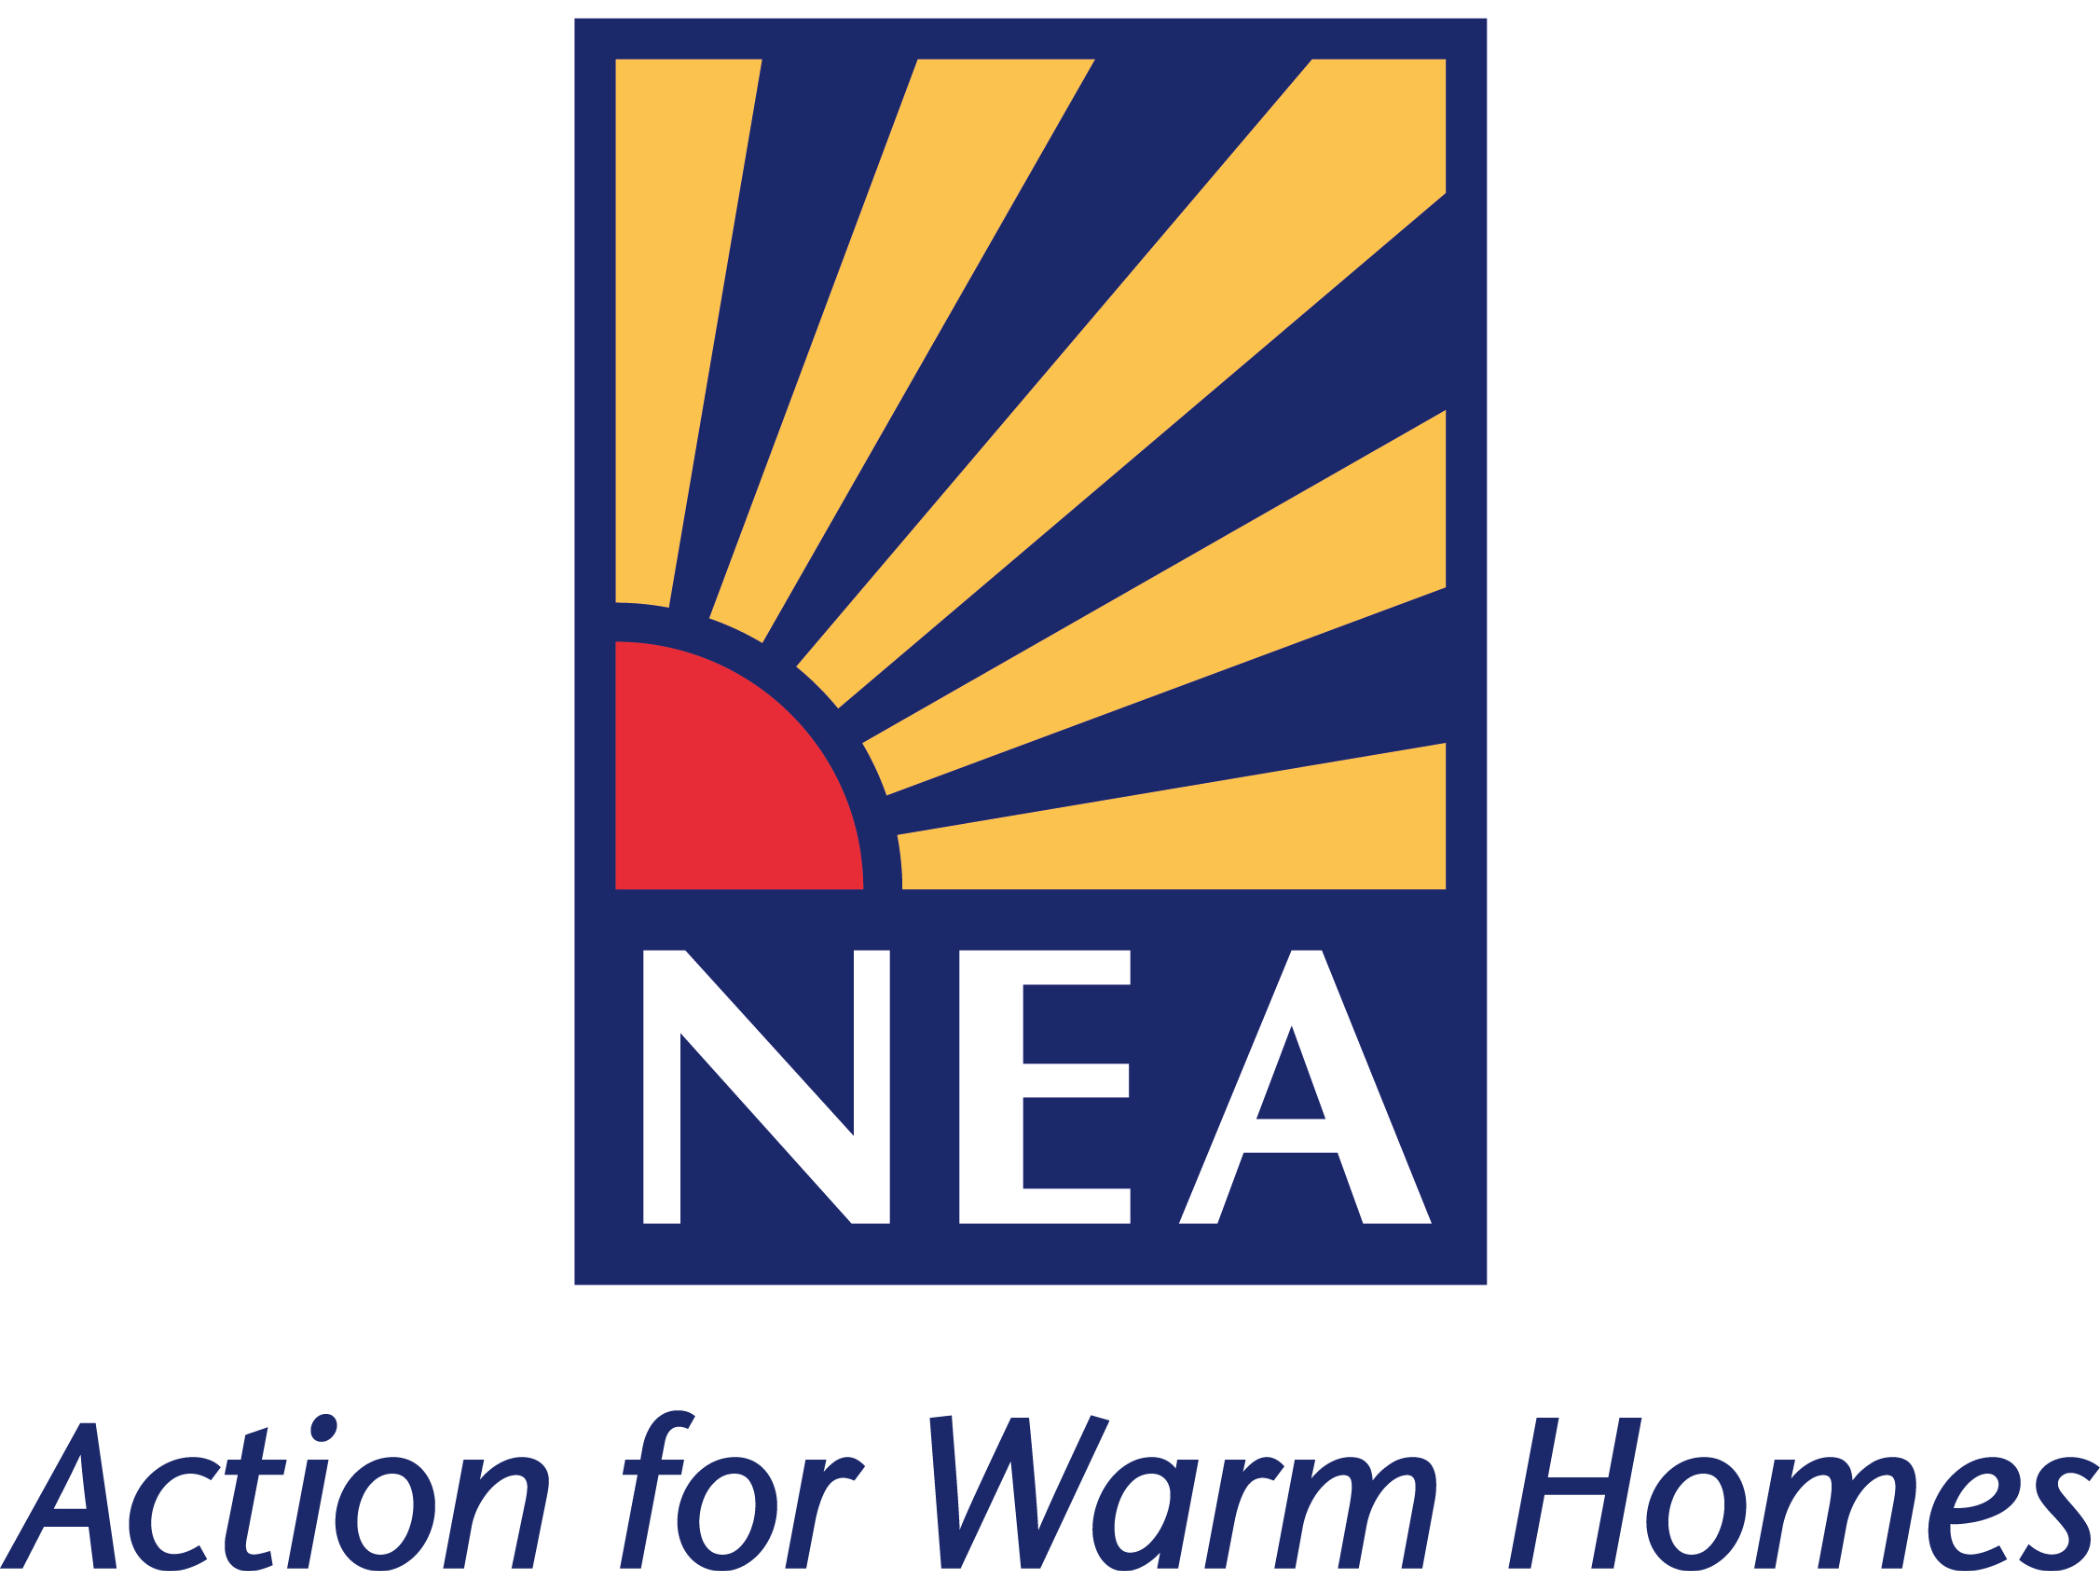 NEA - Action for Warm Homes logo